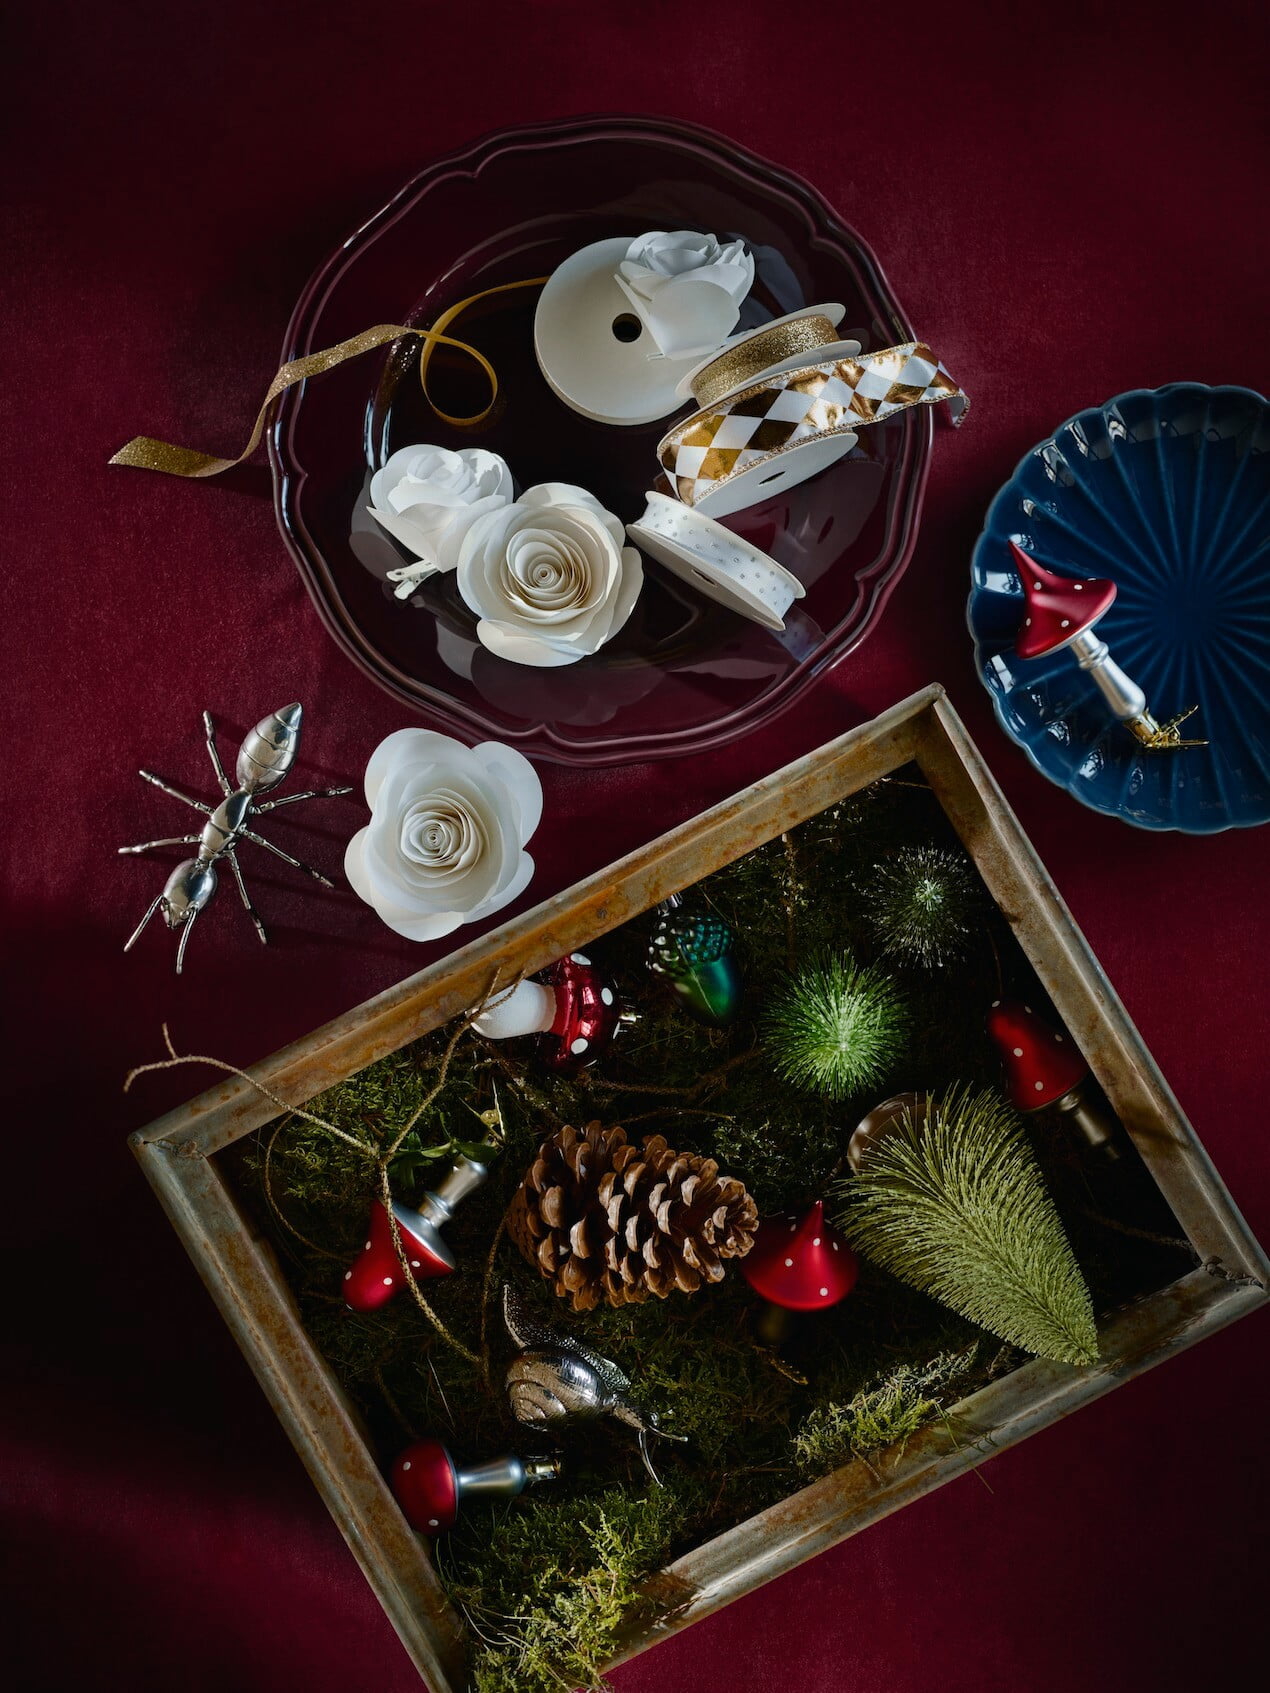 Four handy tips to help you have a hassle free Christmas this year by Interior Stylist Maxine Brady at www.welovehomeblog.com